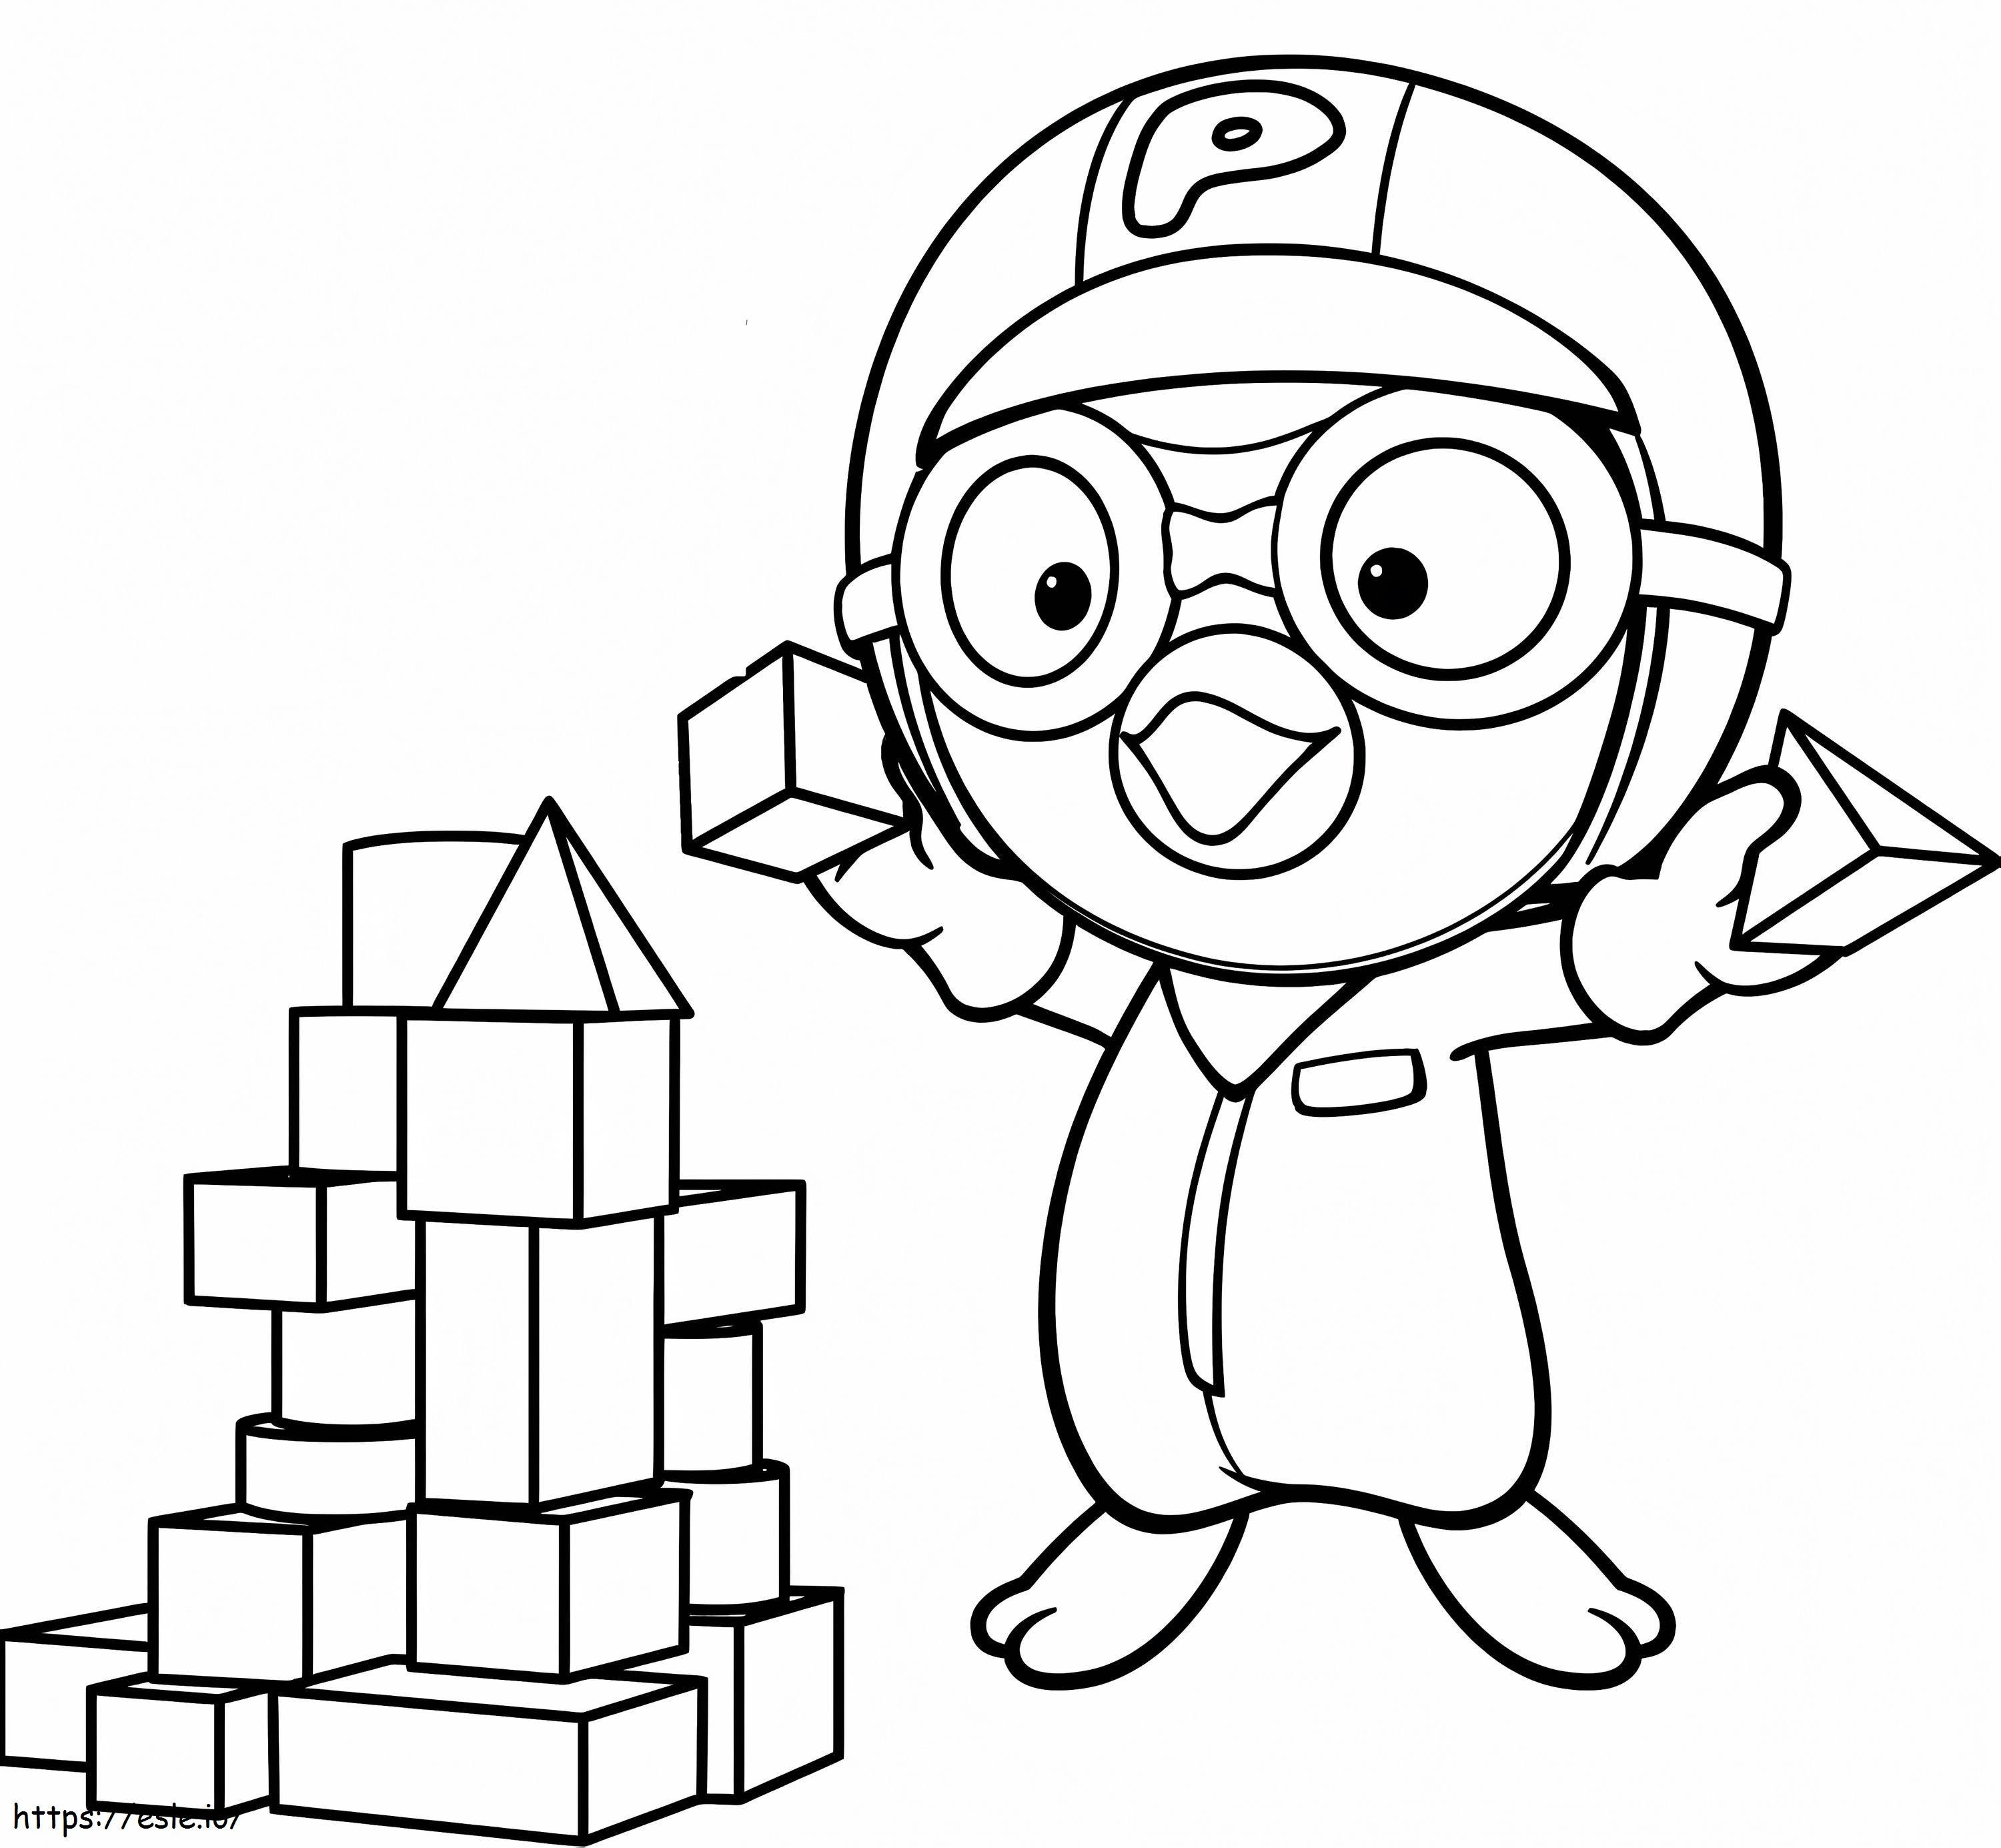 Pororo Playing Puzzle coloring page